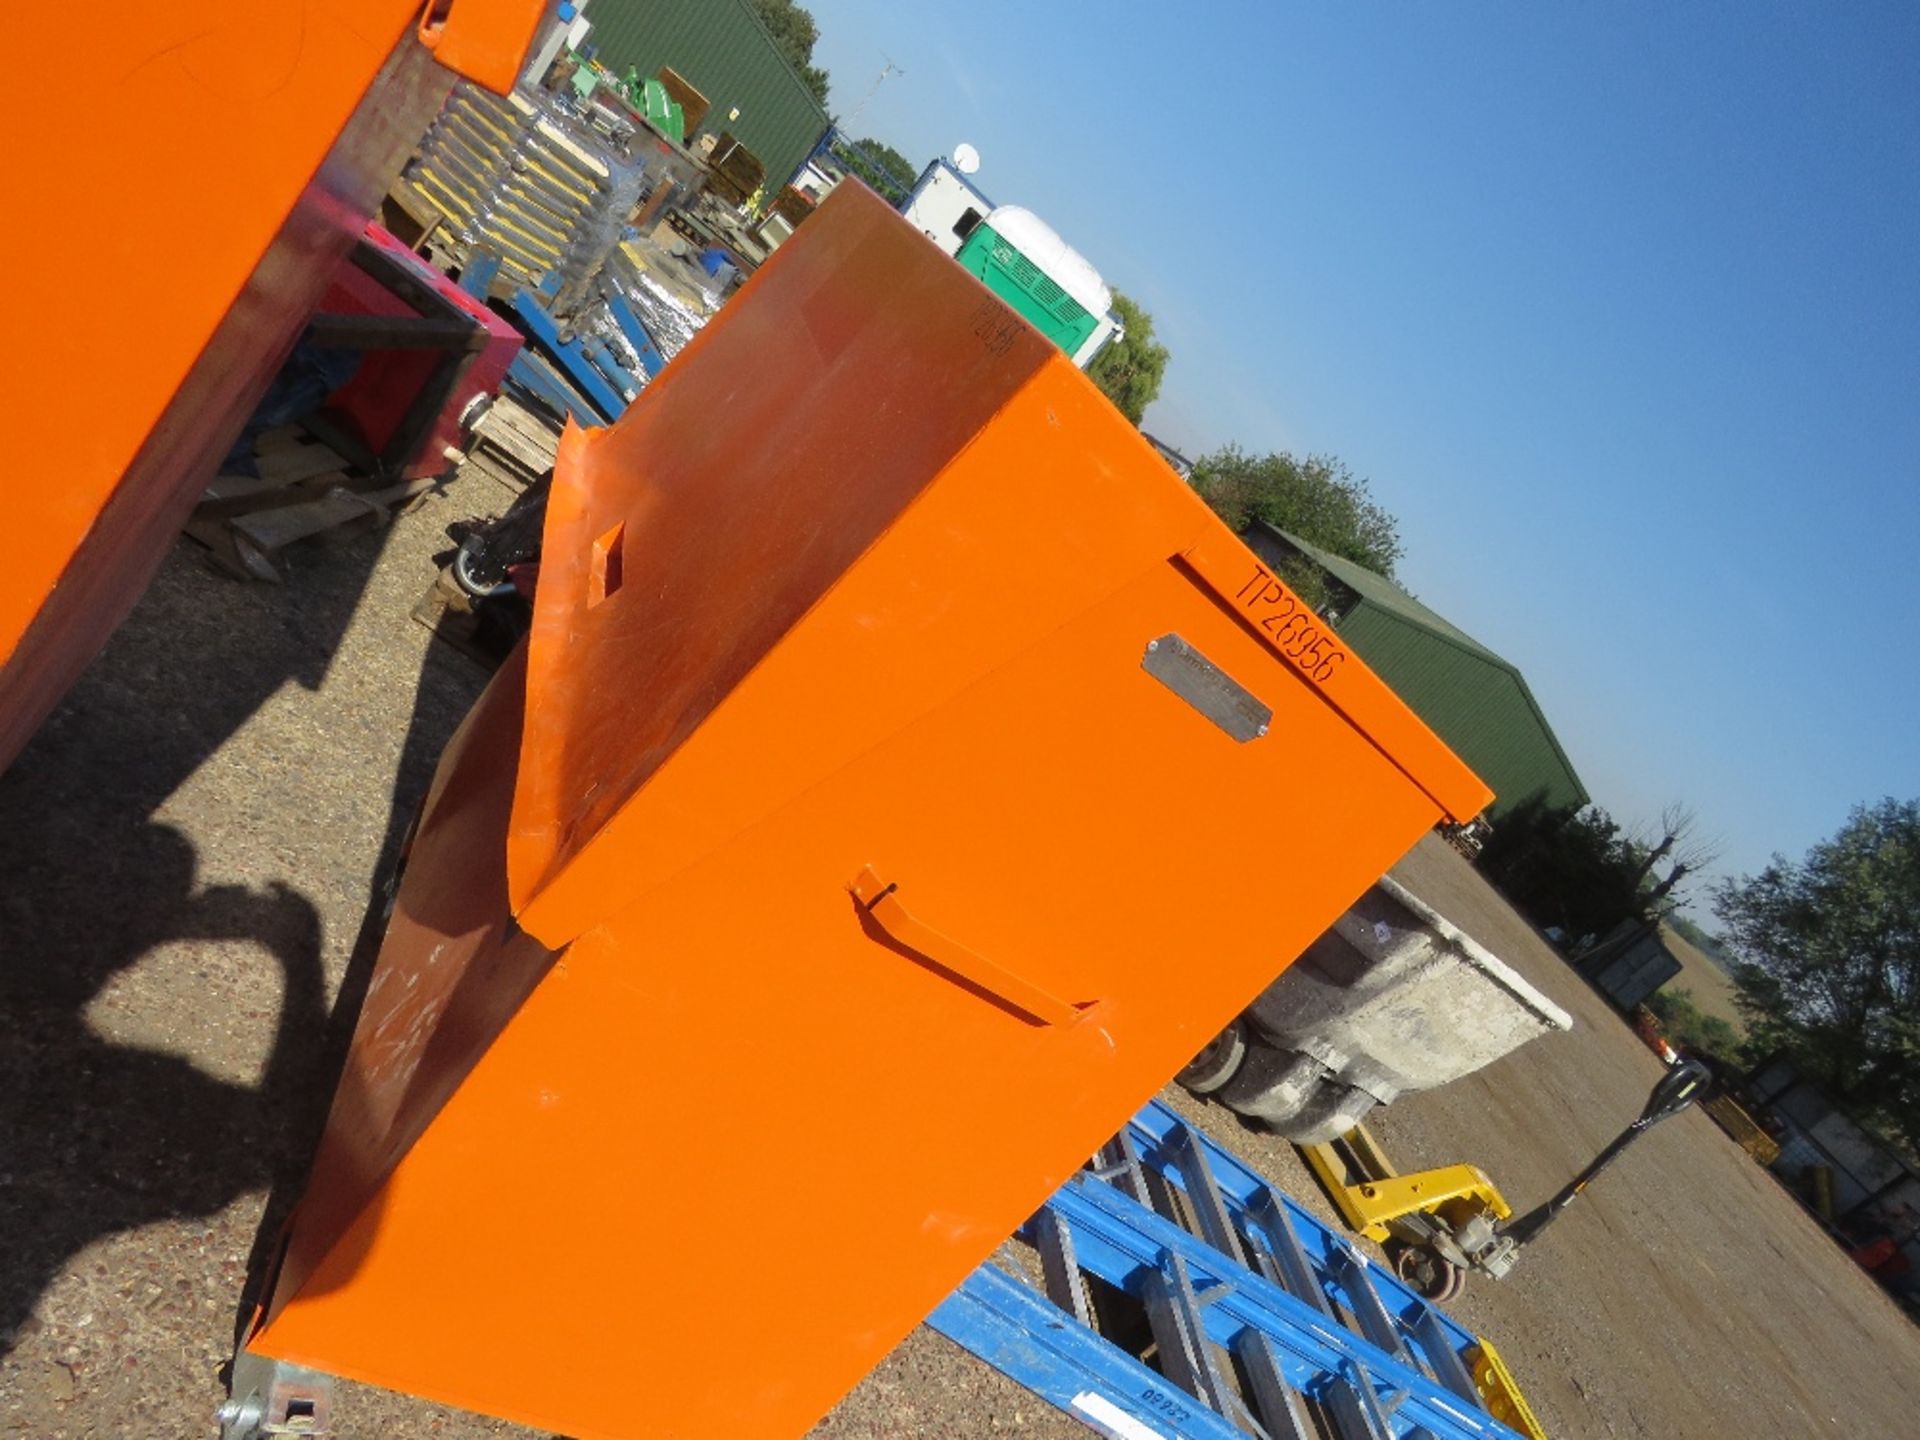 PADDLE MIXER, 110VOLT POWERED. DIRECT FROM LOCAL RAIL CONTRACTOR WHO IS CLOSING A DEPOT. - Image 3 of 3